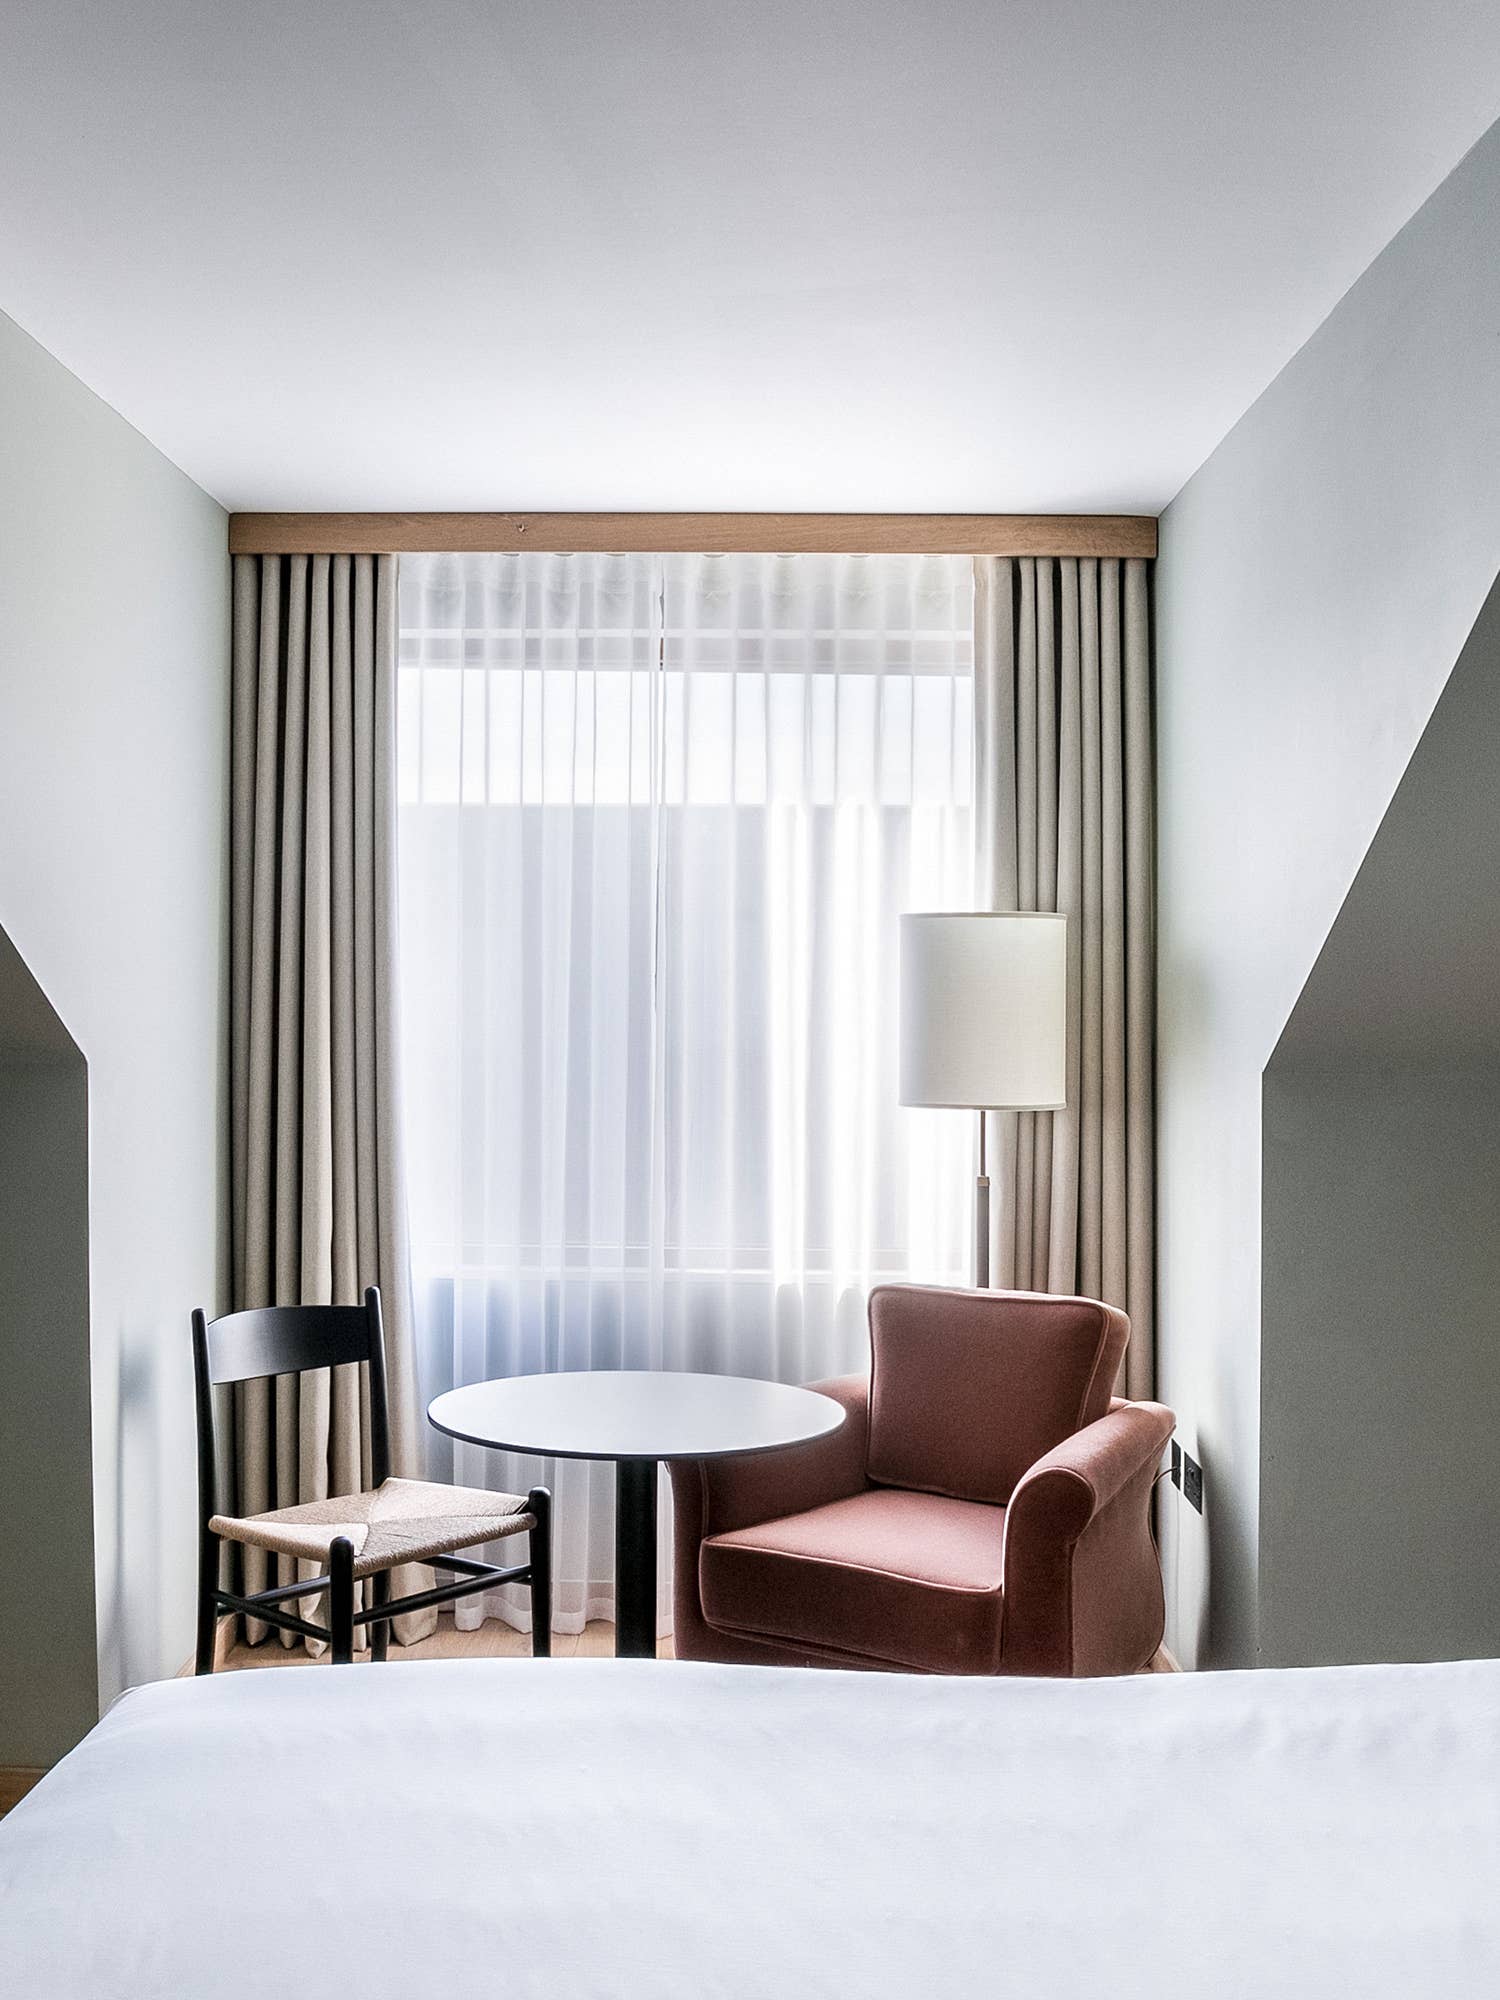 Soho House Quietly Launched 2 ’50s-Inspired Motels—Peek Inside